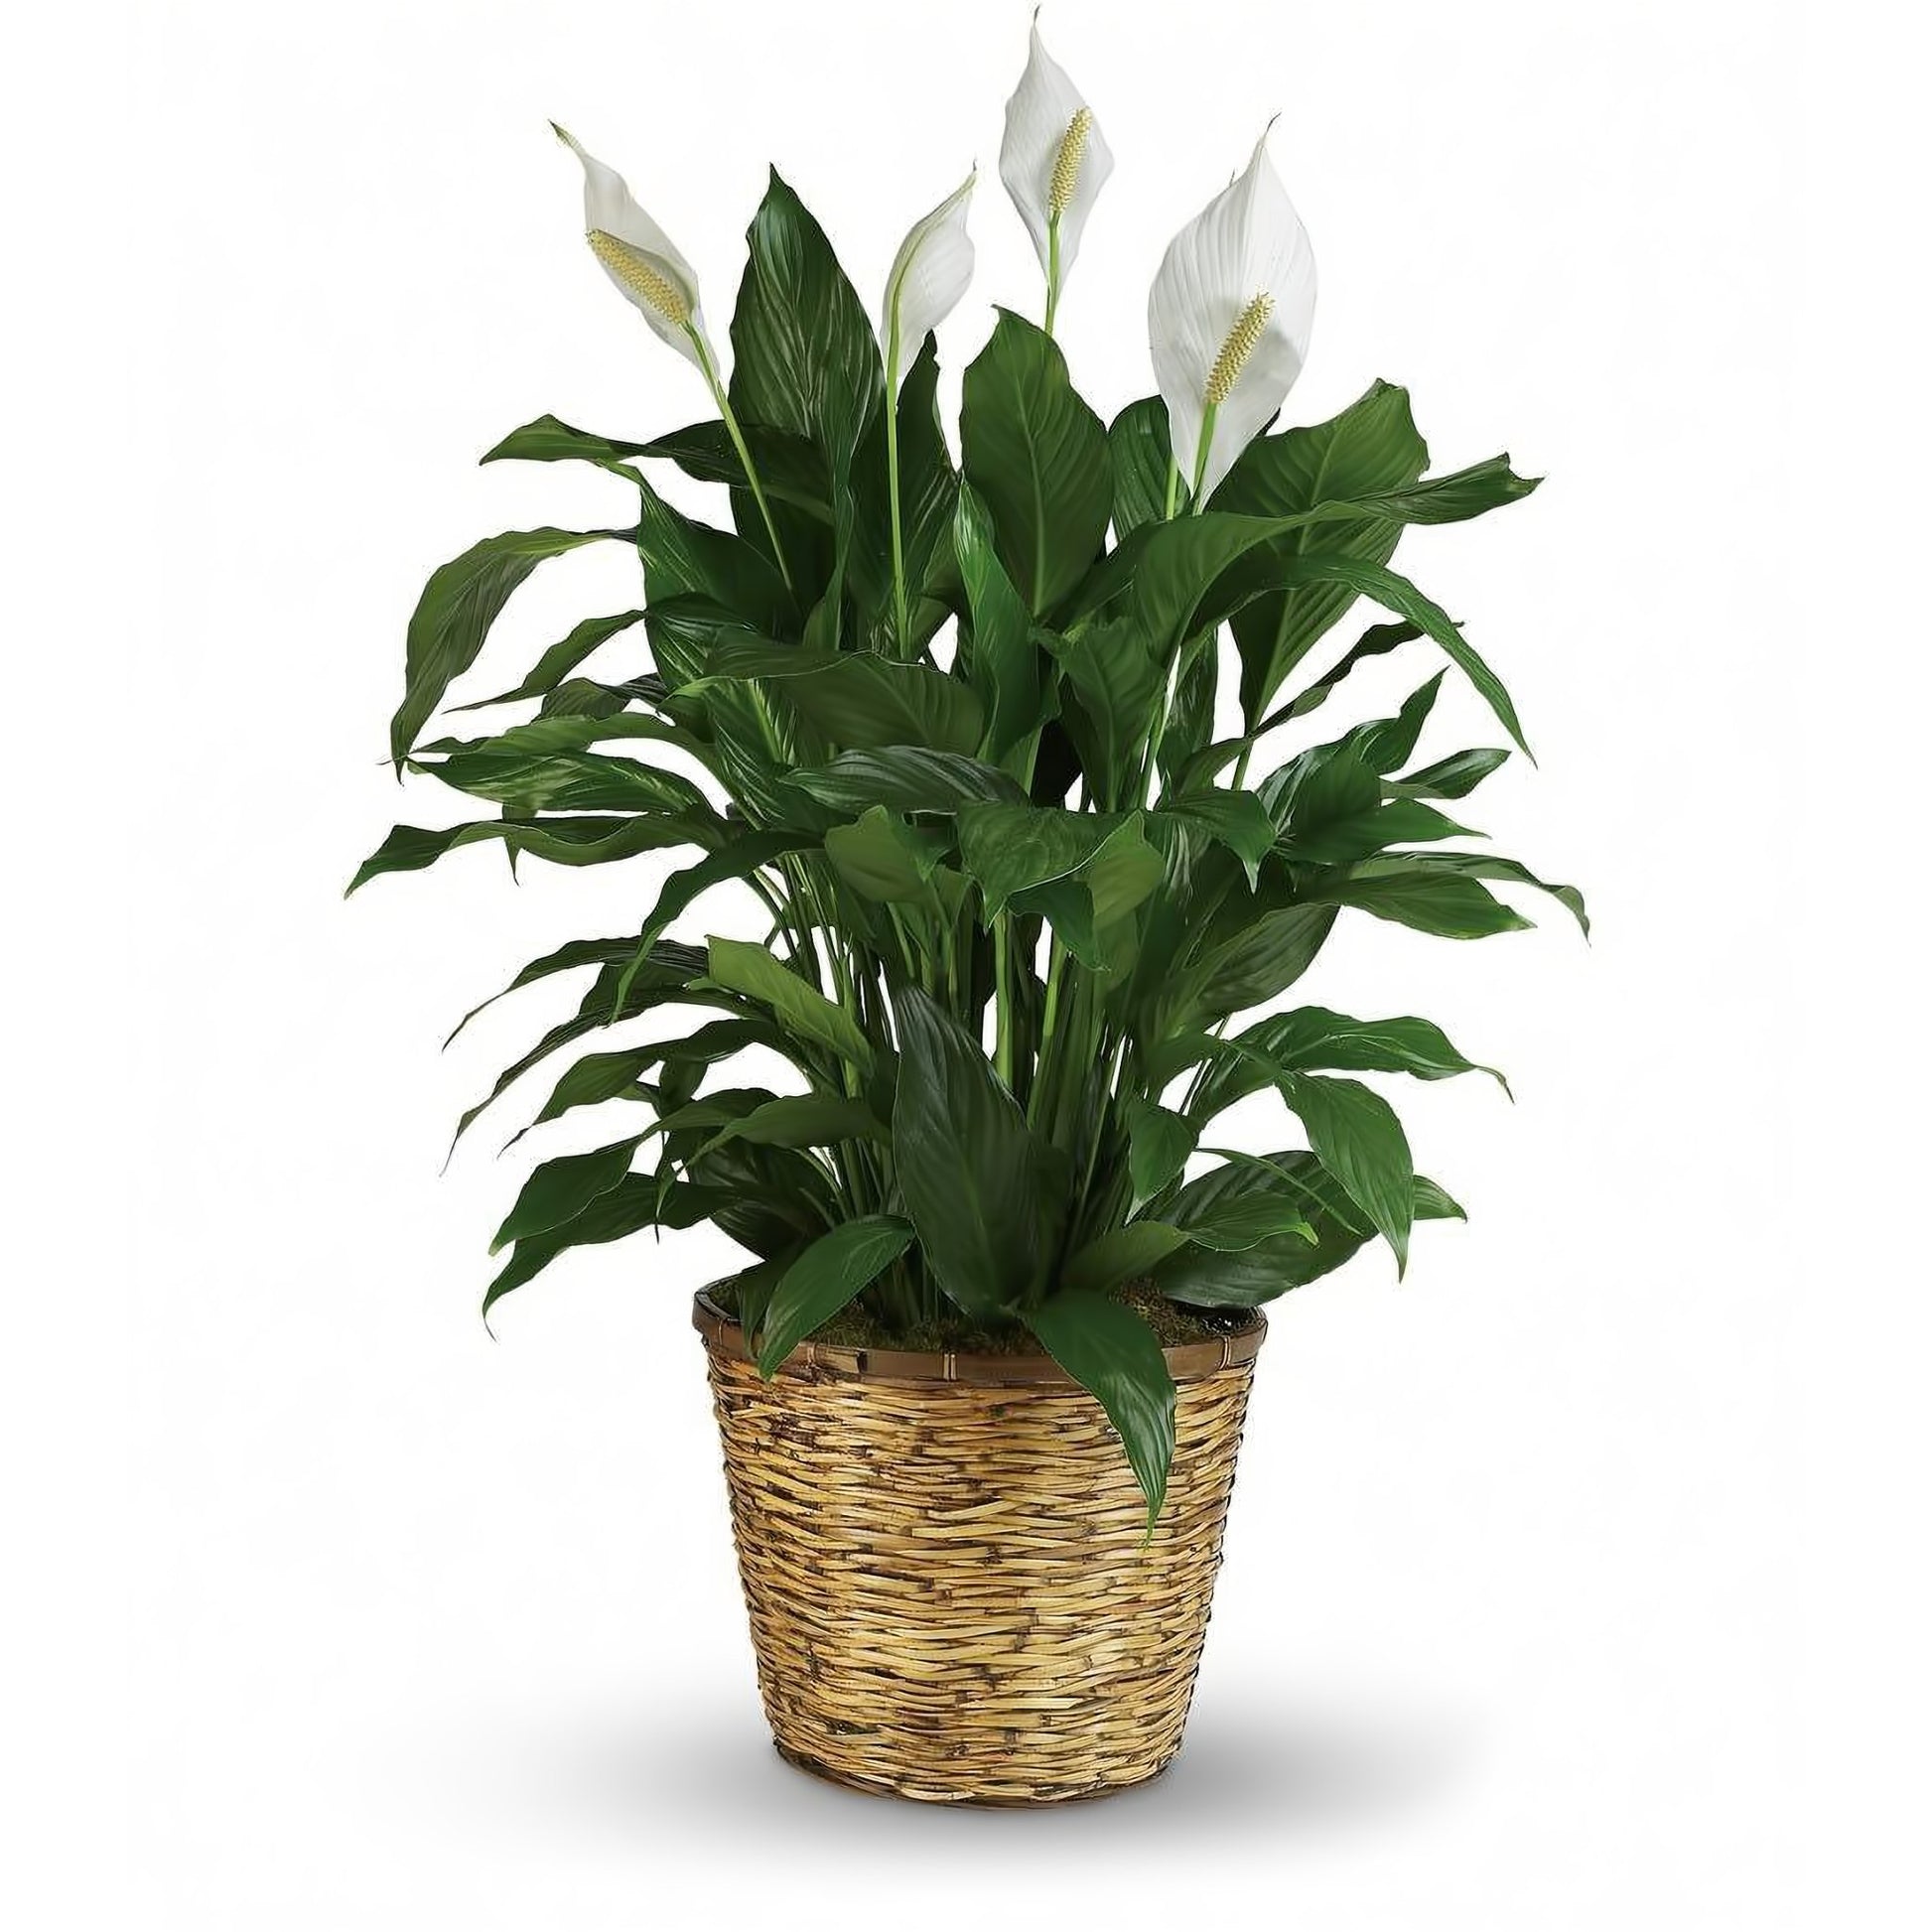 Spathiphyllum Plant Peace Lily - Floral Arrangement - Flower Delivery Brooklyn